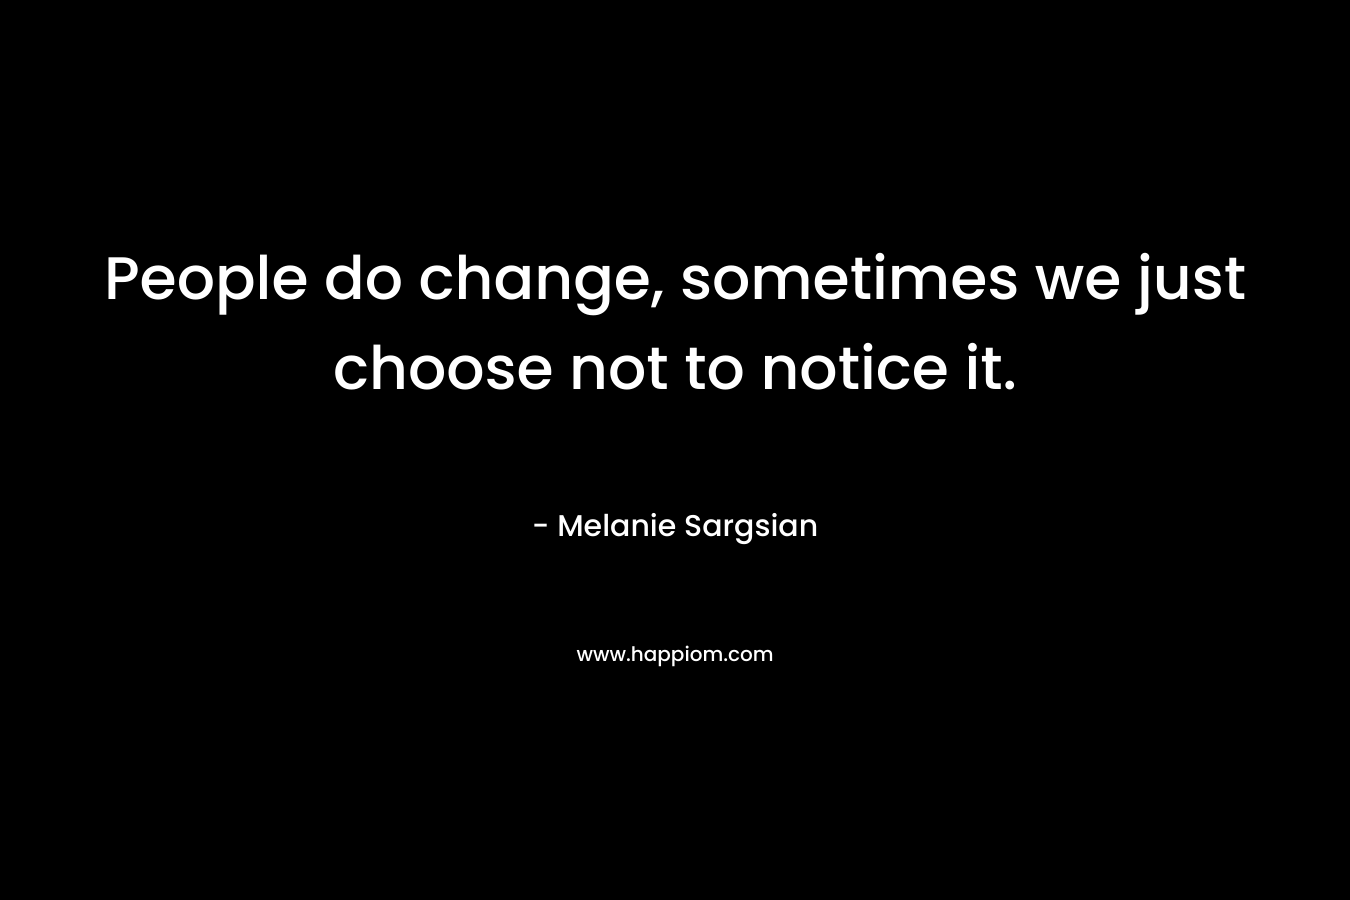 People do change, sometimes we just choose not to notice it.